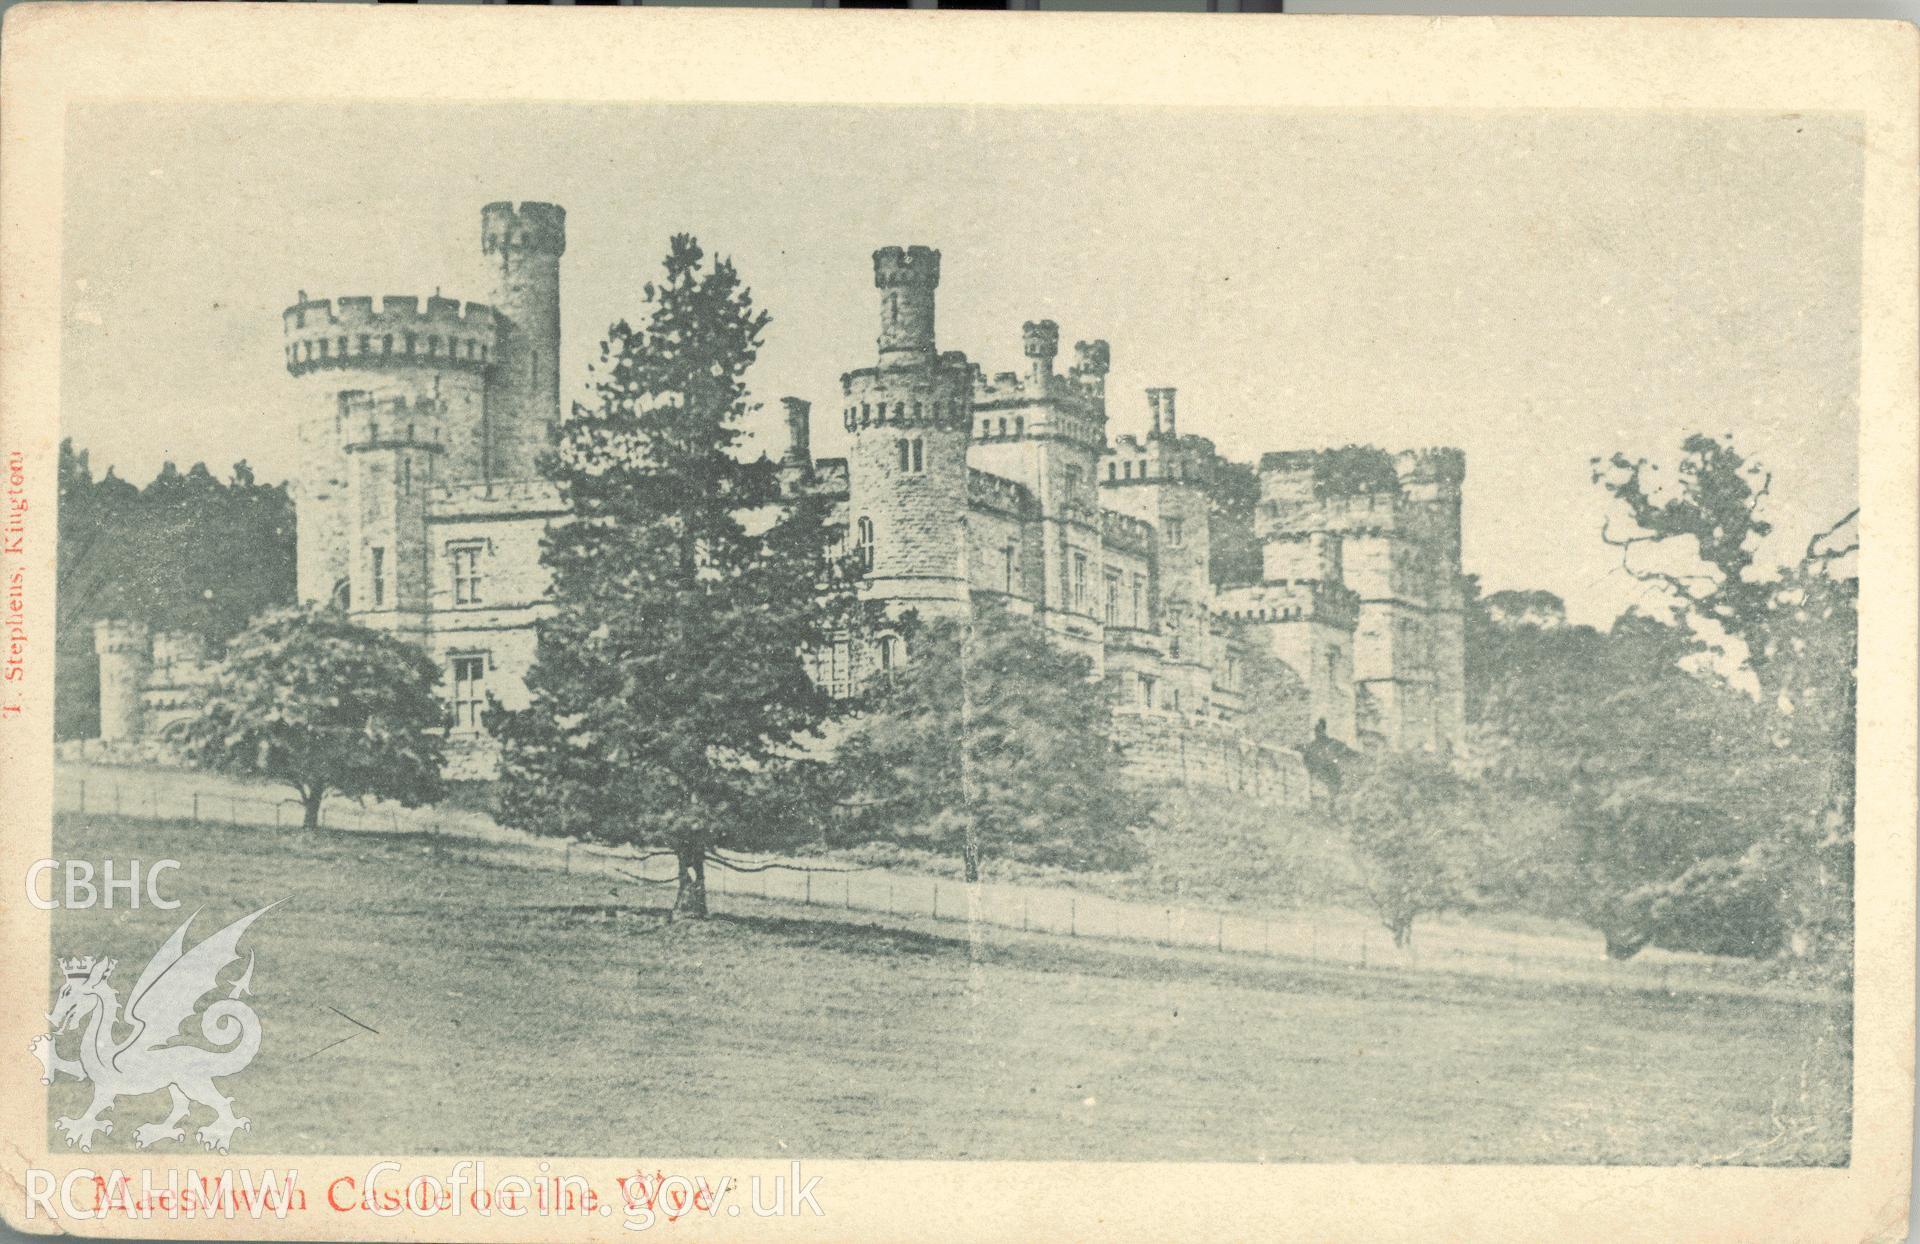 Digitised postcard image of Maesllwch Castle on the Wye. Produced by Parks and Gardens Data Services, from an original item in the Peter Davis Collection at Parks and Gardens UK. We hold only web-resolution images of this collection, suitable for viewing on screen and for research purposes only. We do not hold the original images, or publication quality scans.